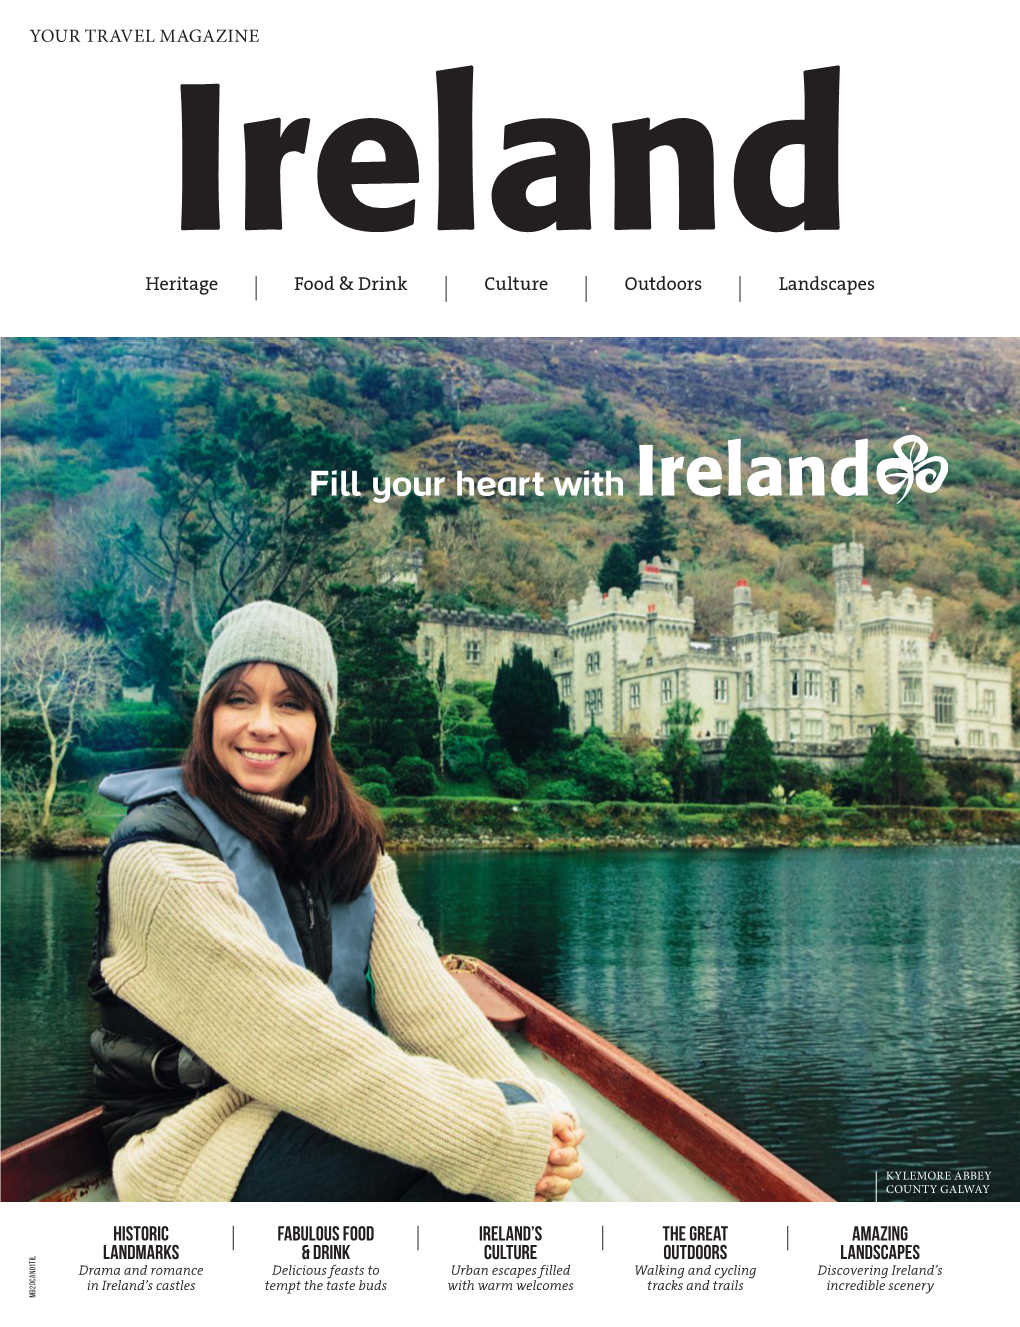 HISTORIC LANDMARKS Fabulous Food & DRINK IRELAND's CULTURE the GREAT OUTDOORS Amazing Landscapes